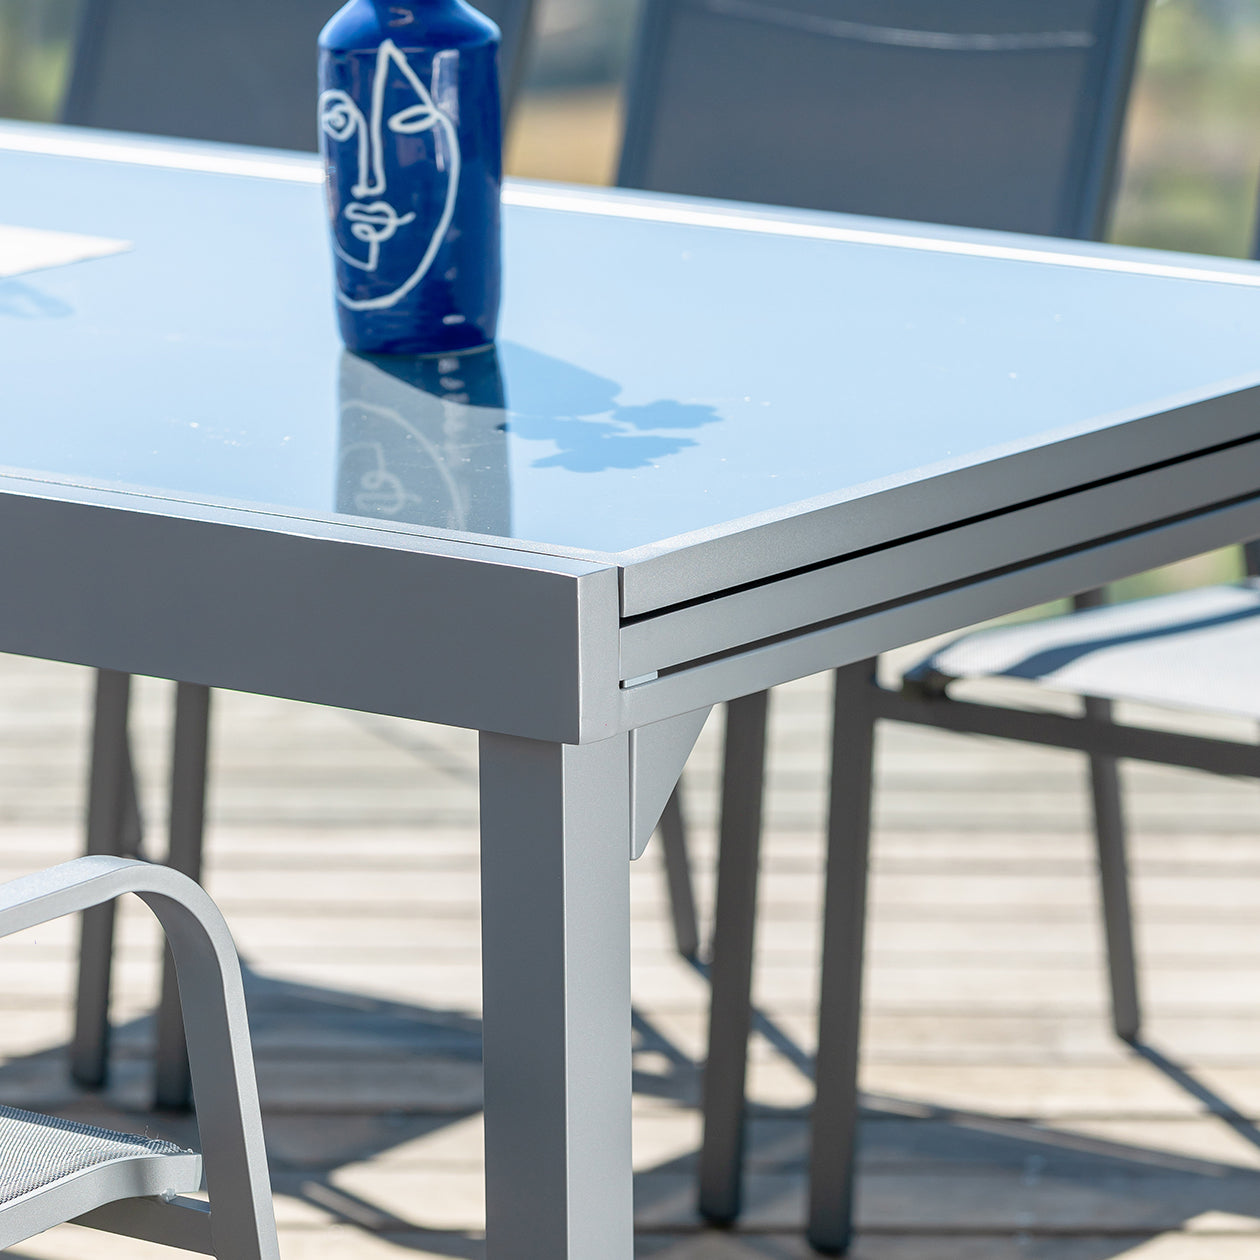 12-seater extendable garden table in Murano glass (320 x 100 cm)